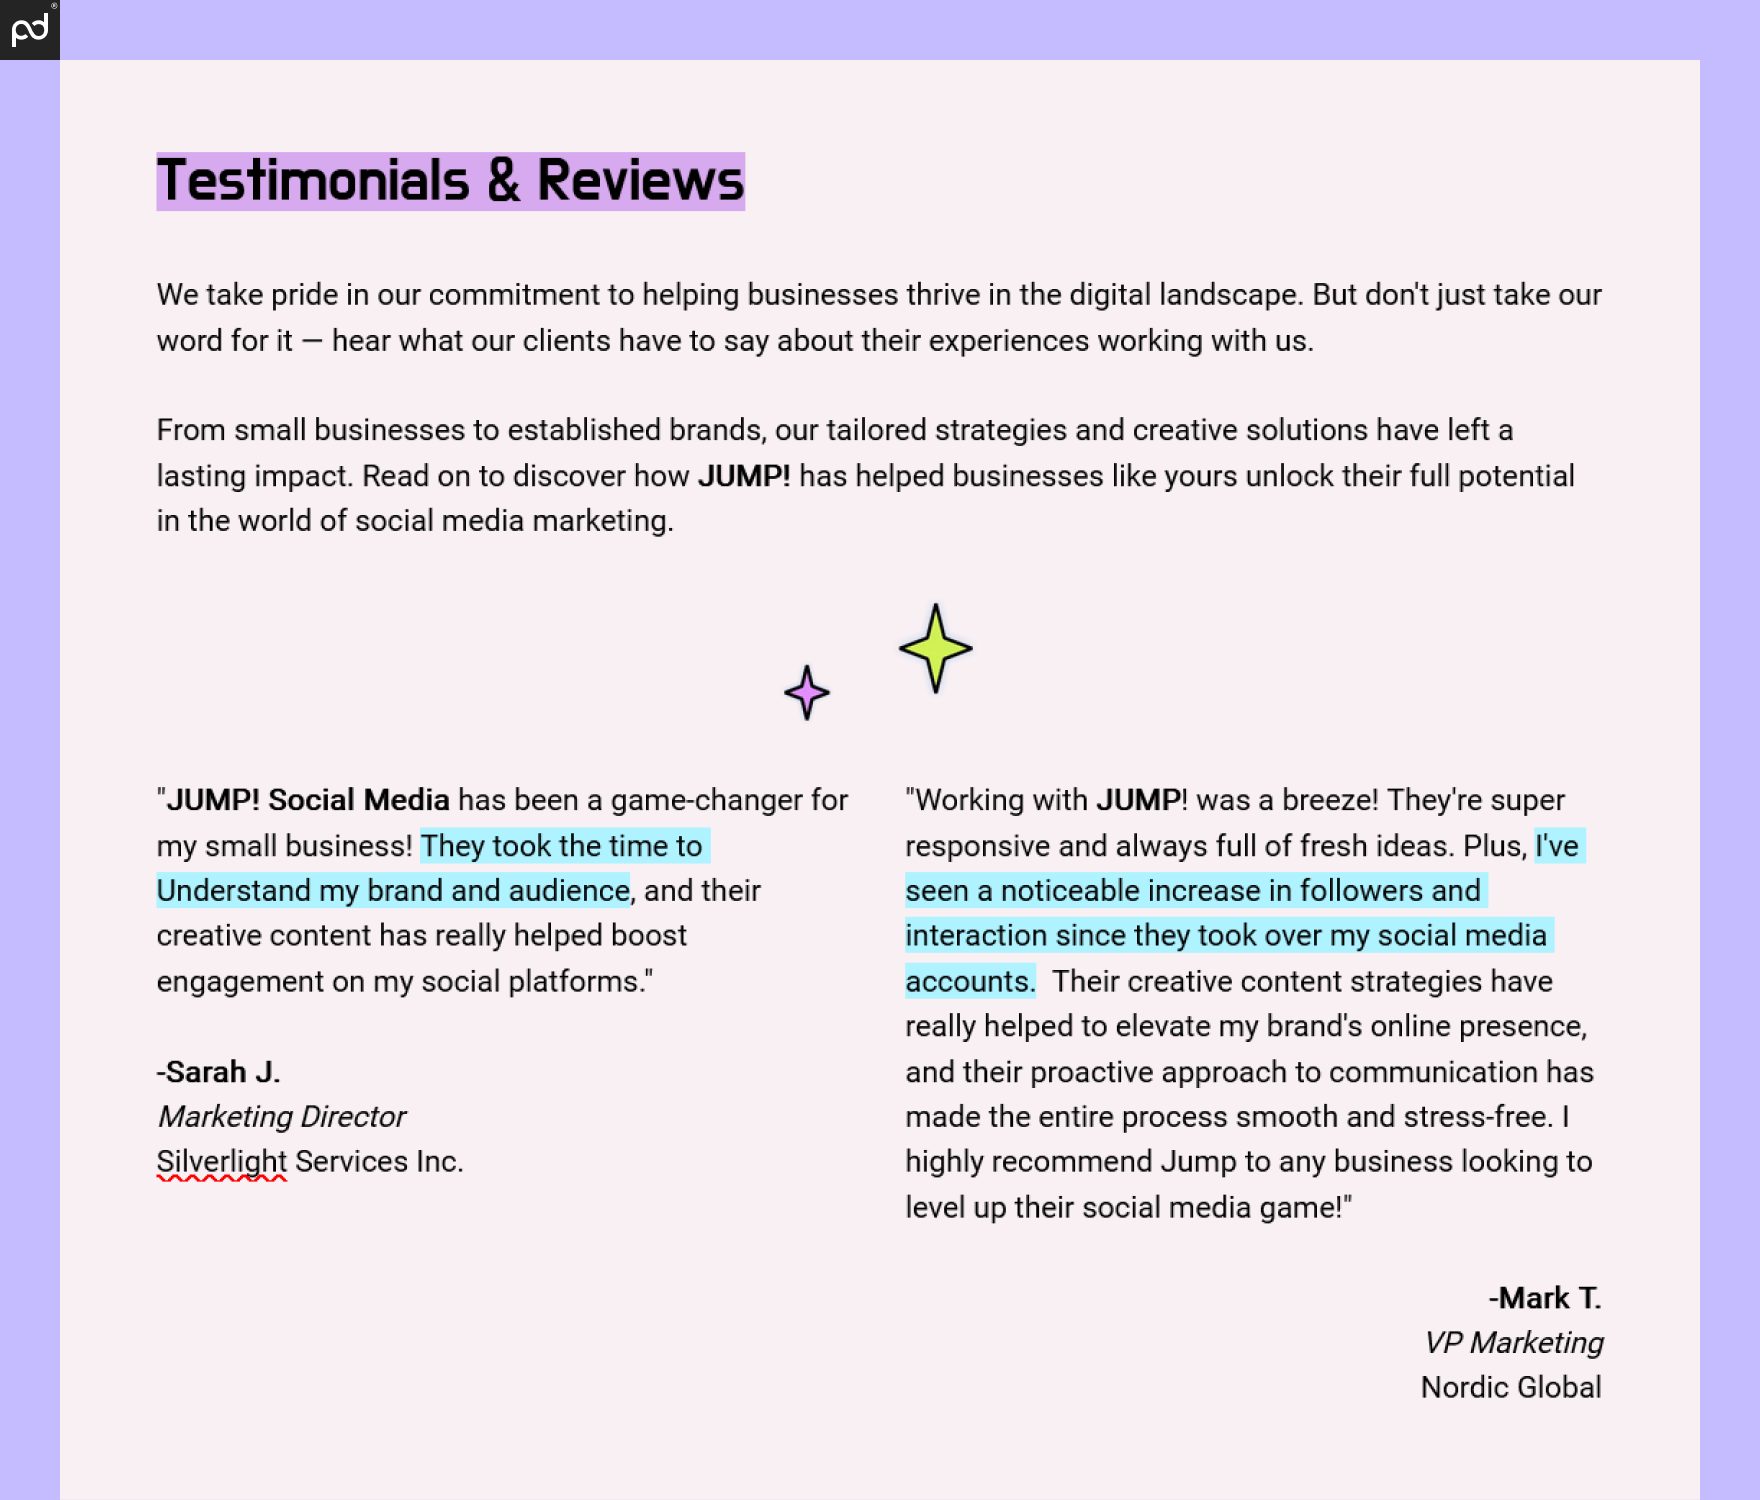 An image of a testimonials page, which features reviews with highlighted text around customer KPIs and deliverables.